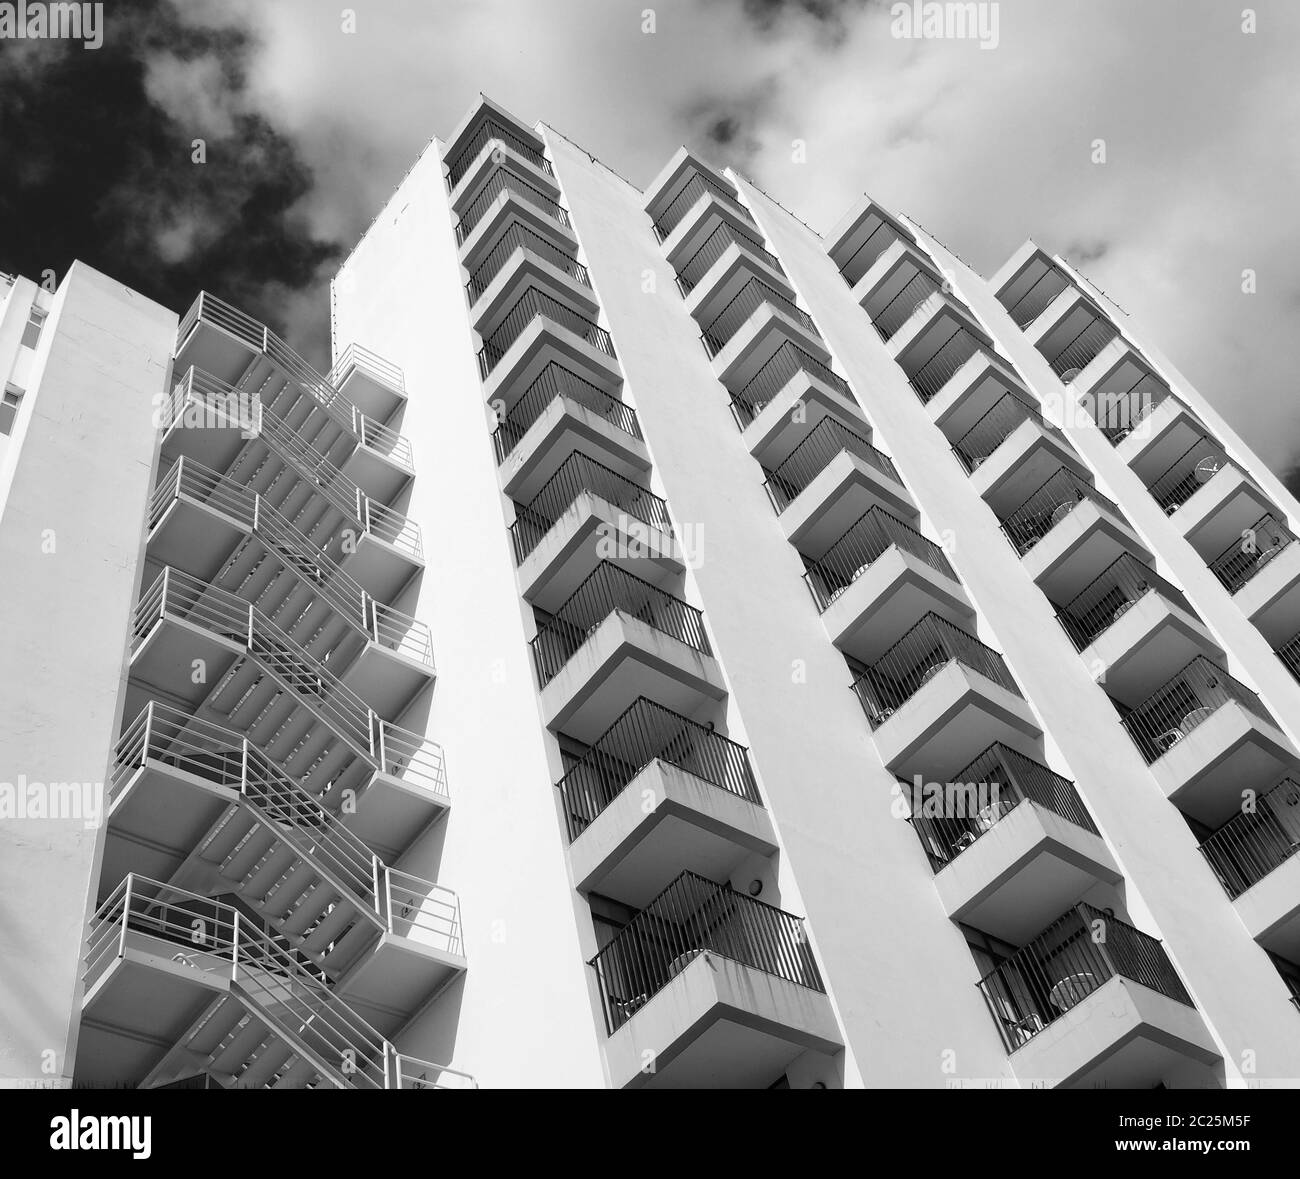 monochrome angled detail view of an old 1960s white concrete apartment building with steps and balconies against sky and clouds Stock Photo